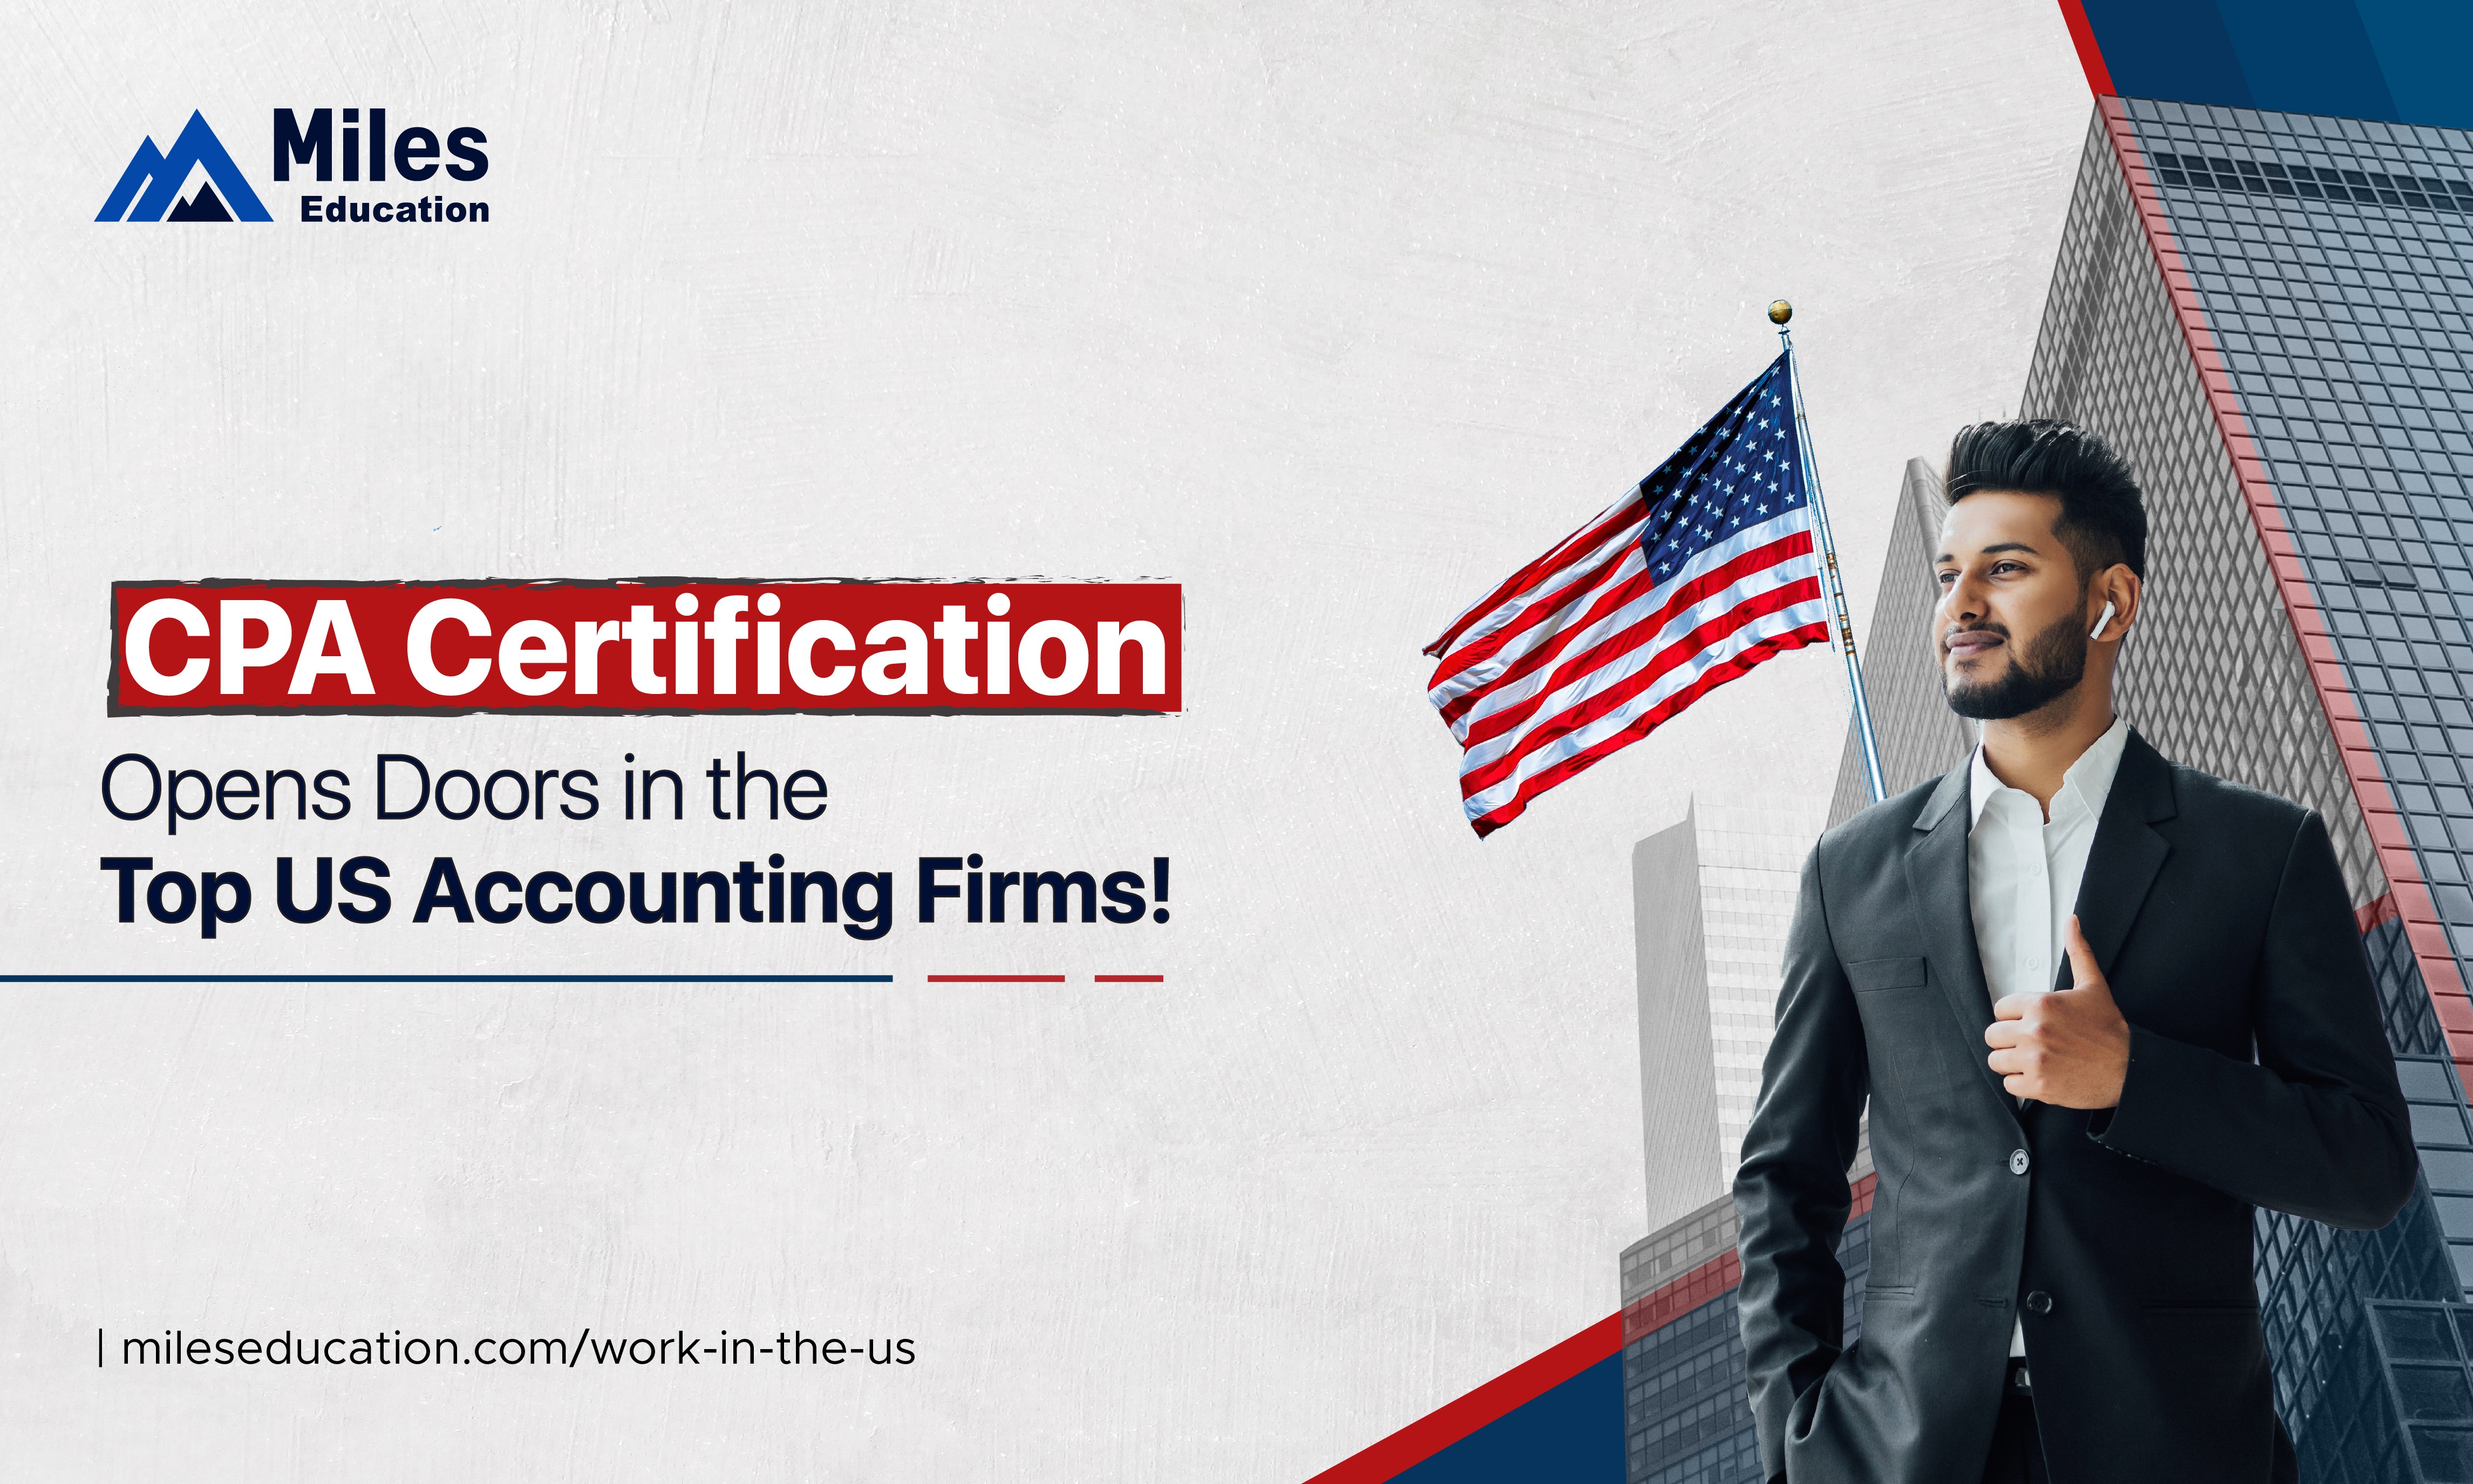 CPA Certification Opens Doors in the Top US Accounting Firms!